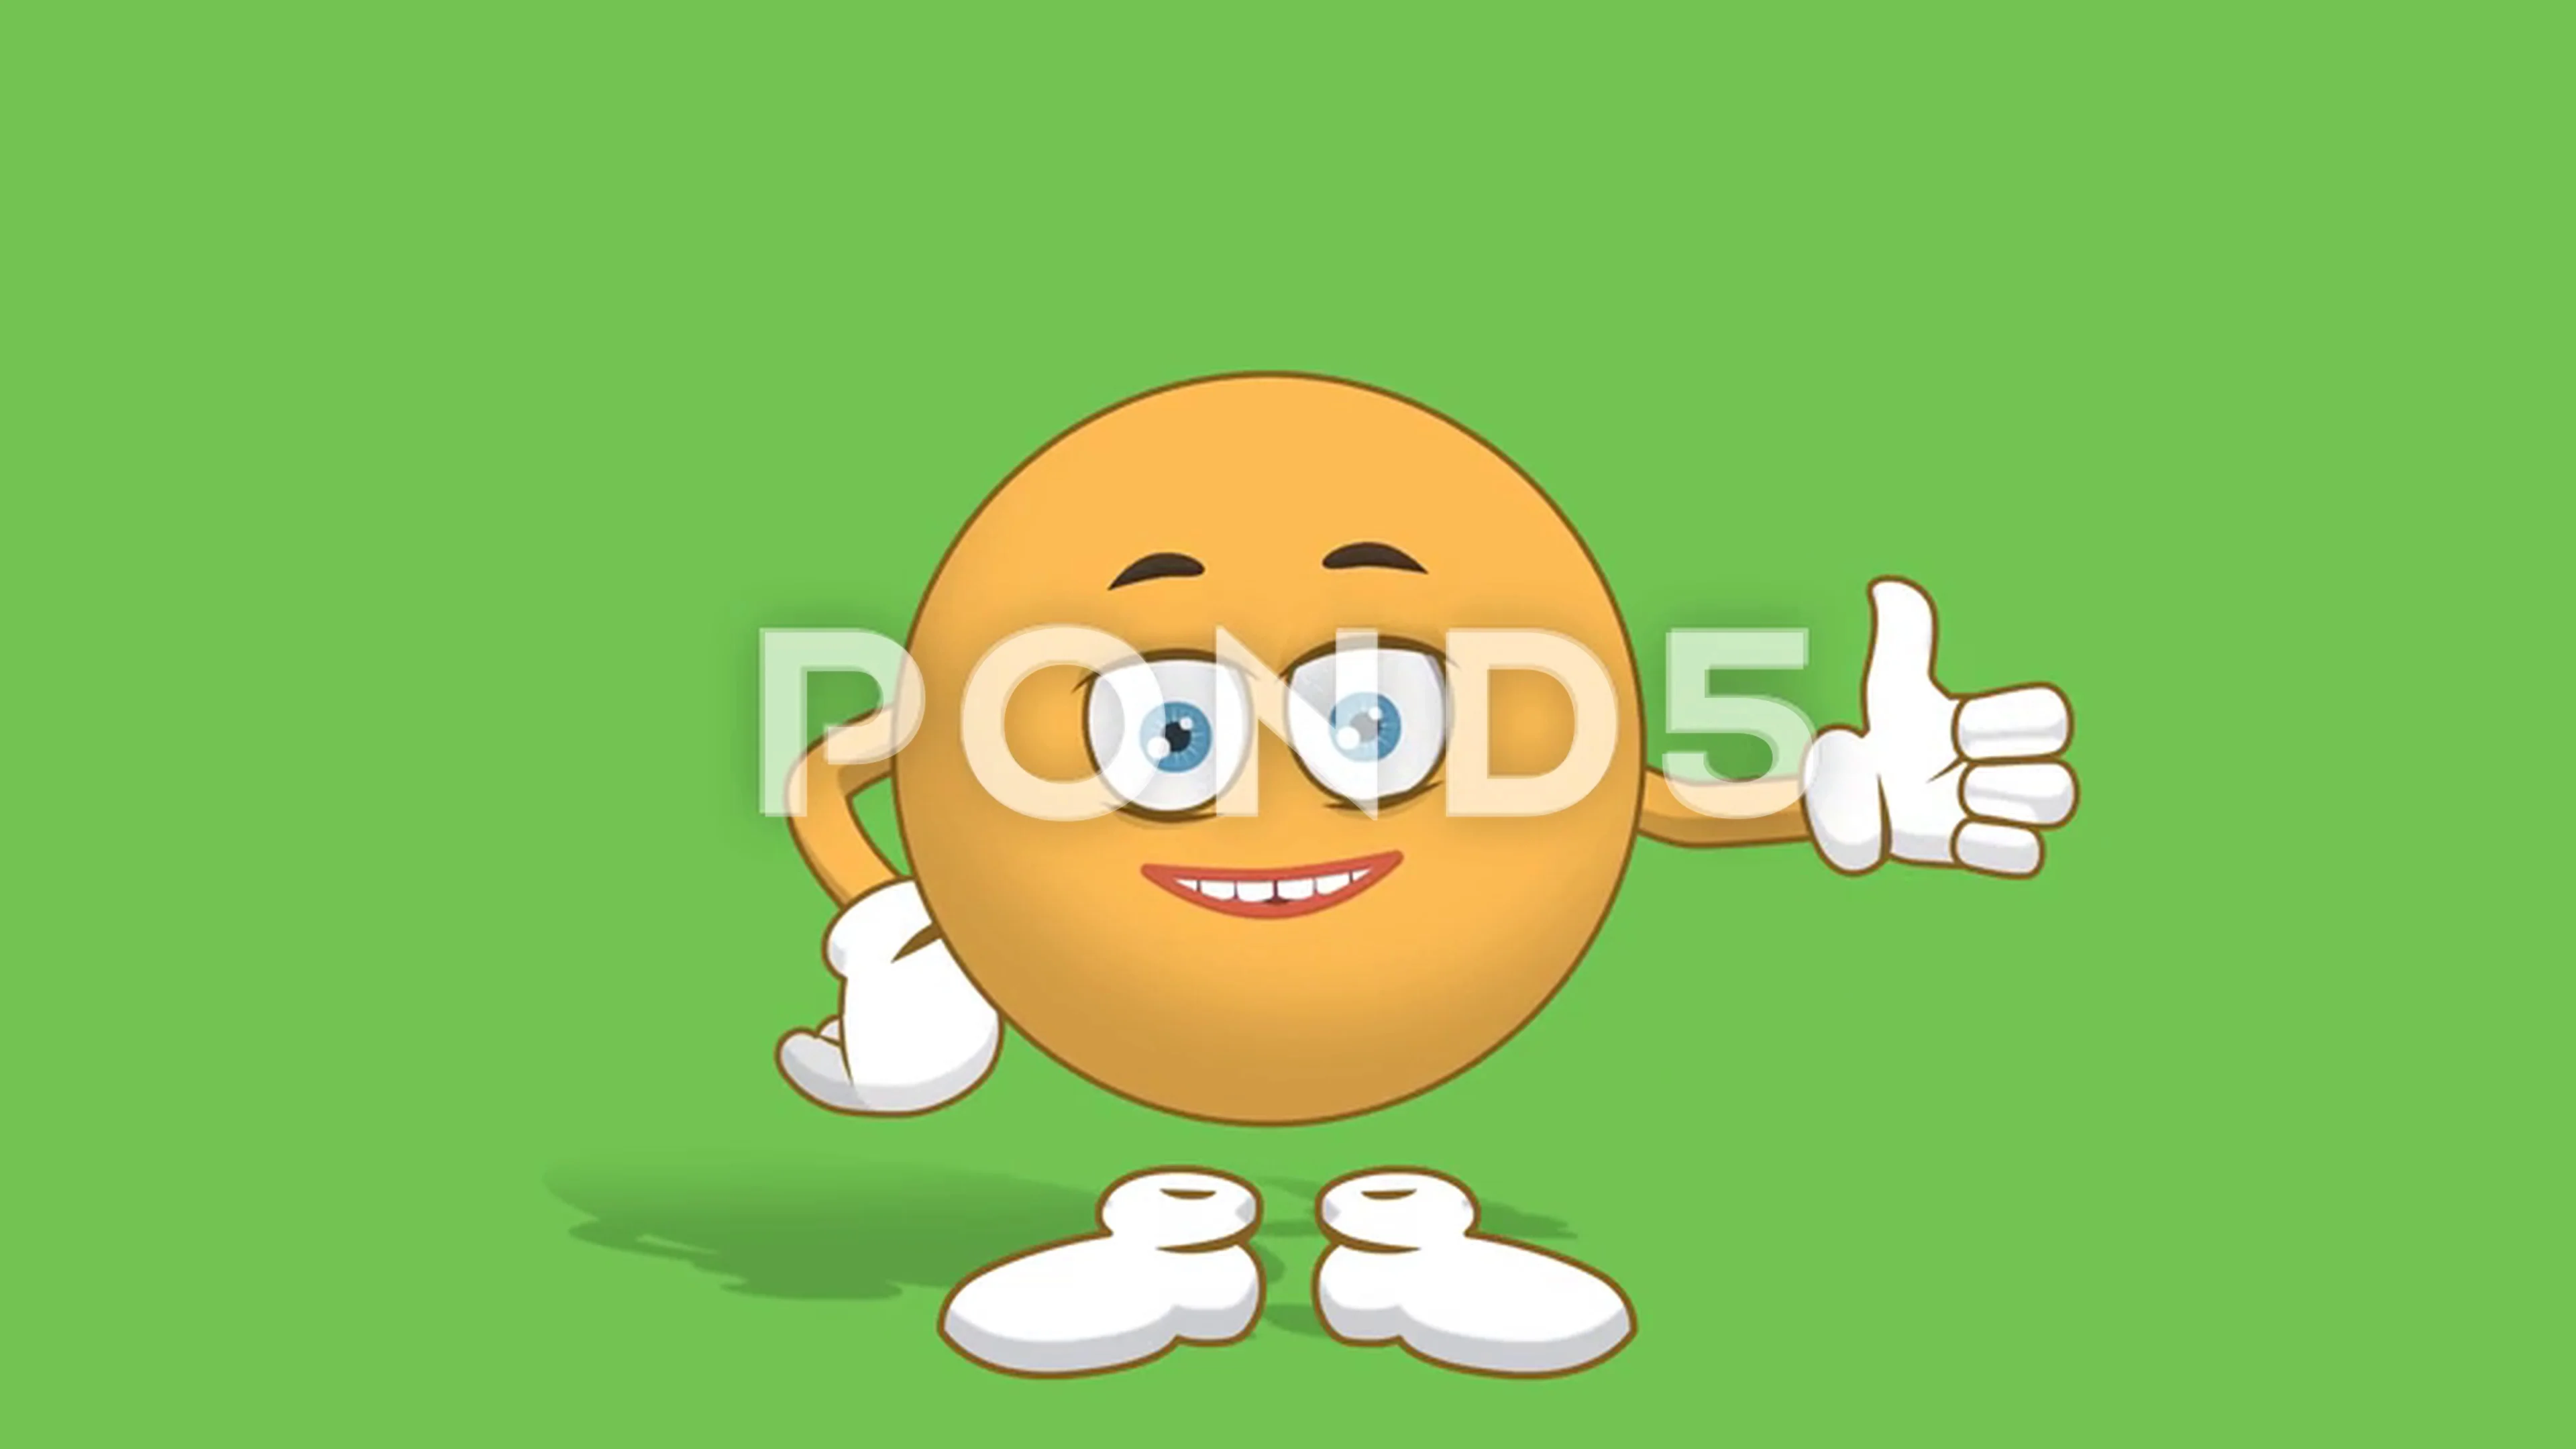 moving happy smiley face clip art